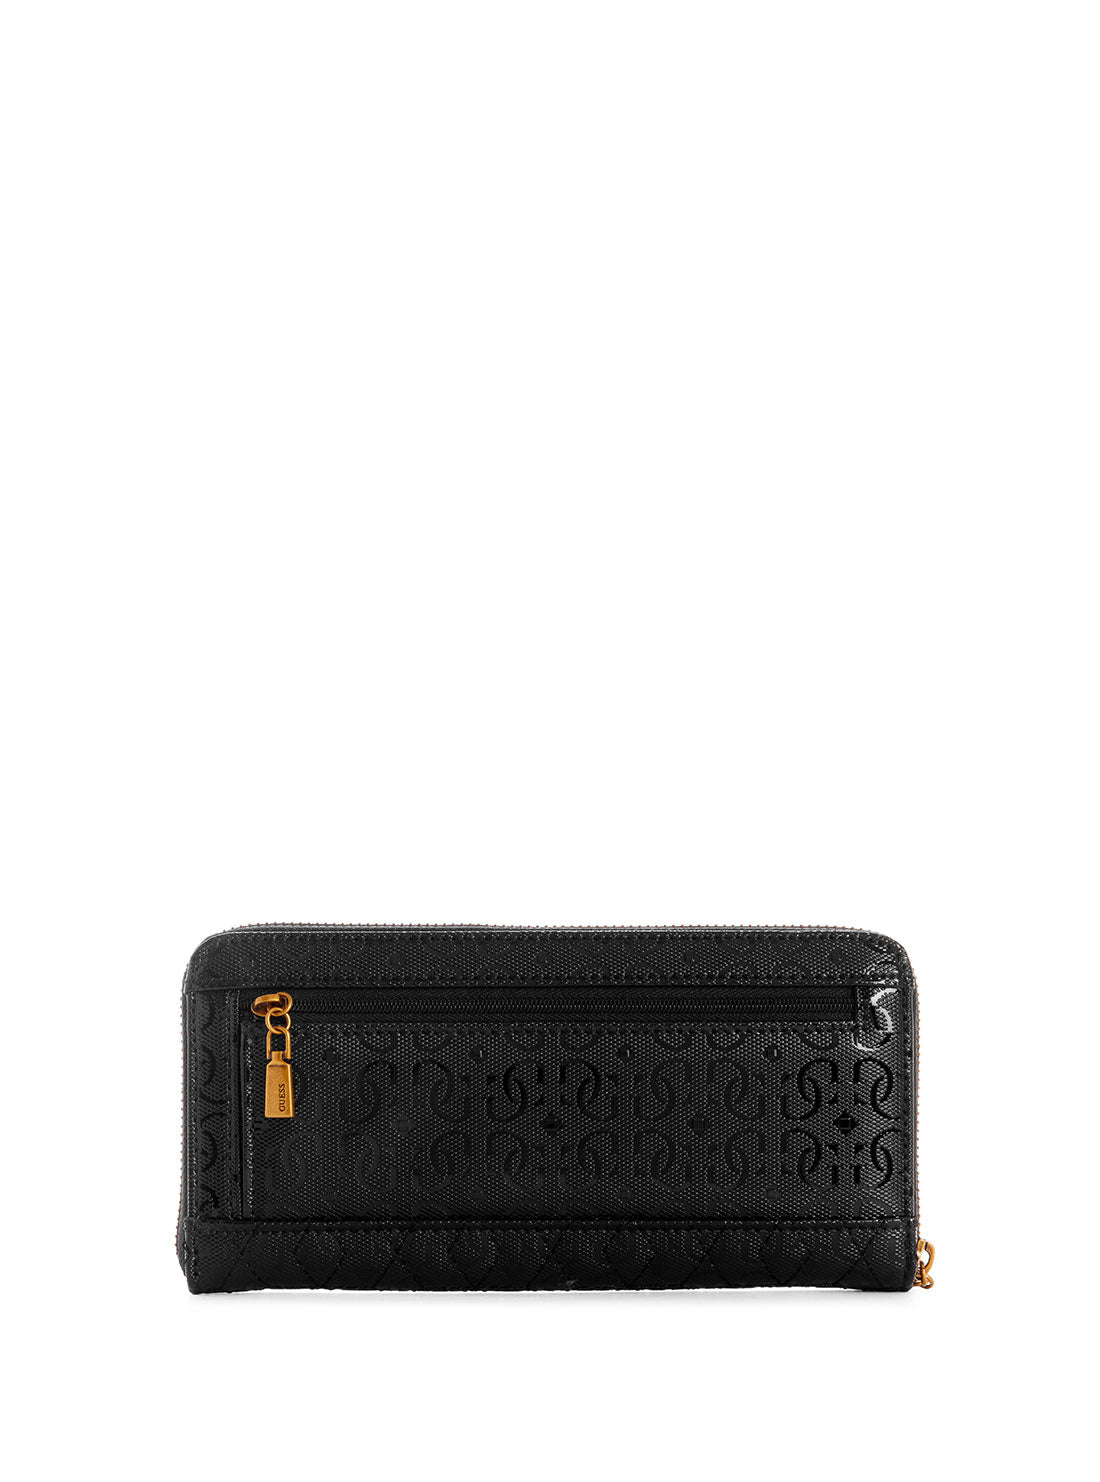 GUESS Womens Black Isidora Large Zip Wallet GB854746 Back View